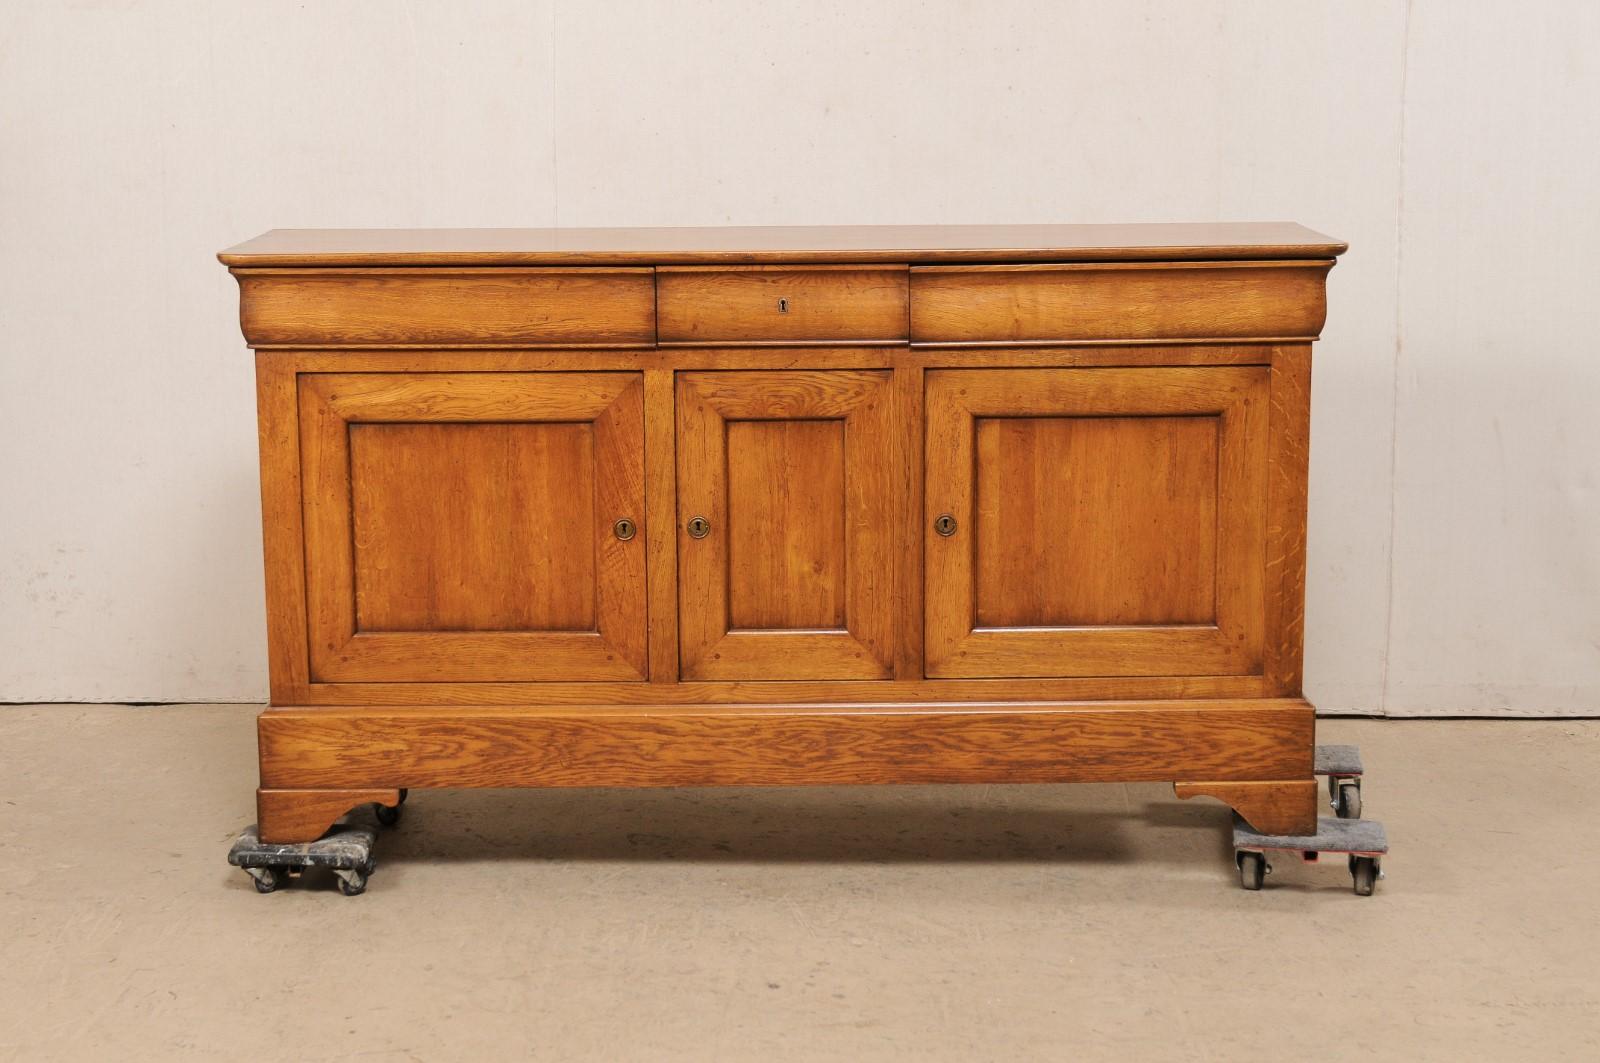 20th Century French Mid-20th C. Fruitwood Buffet Console Cabinet